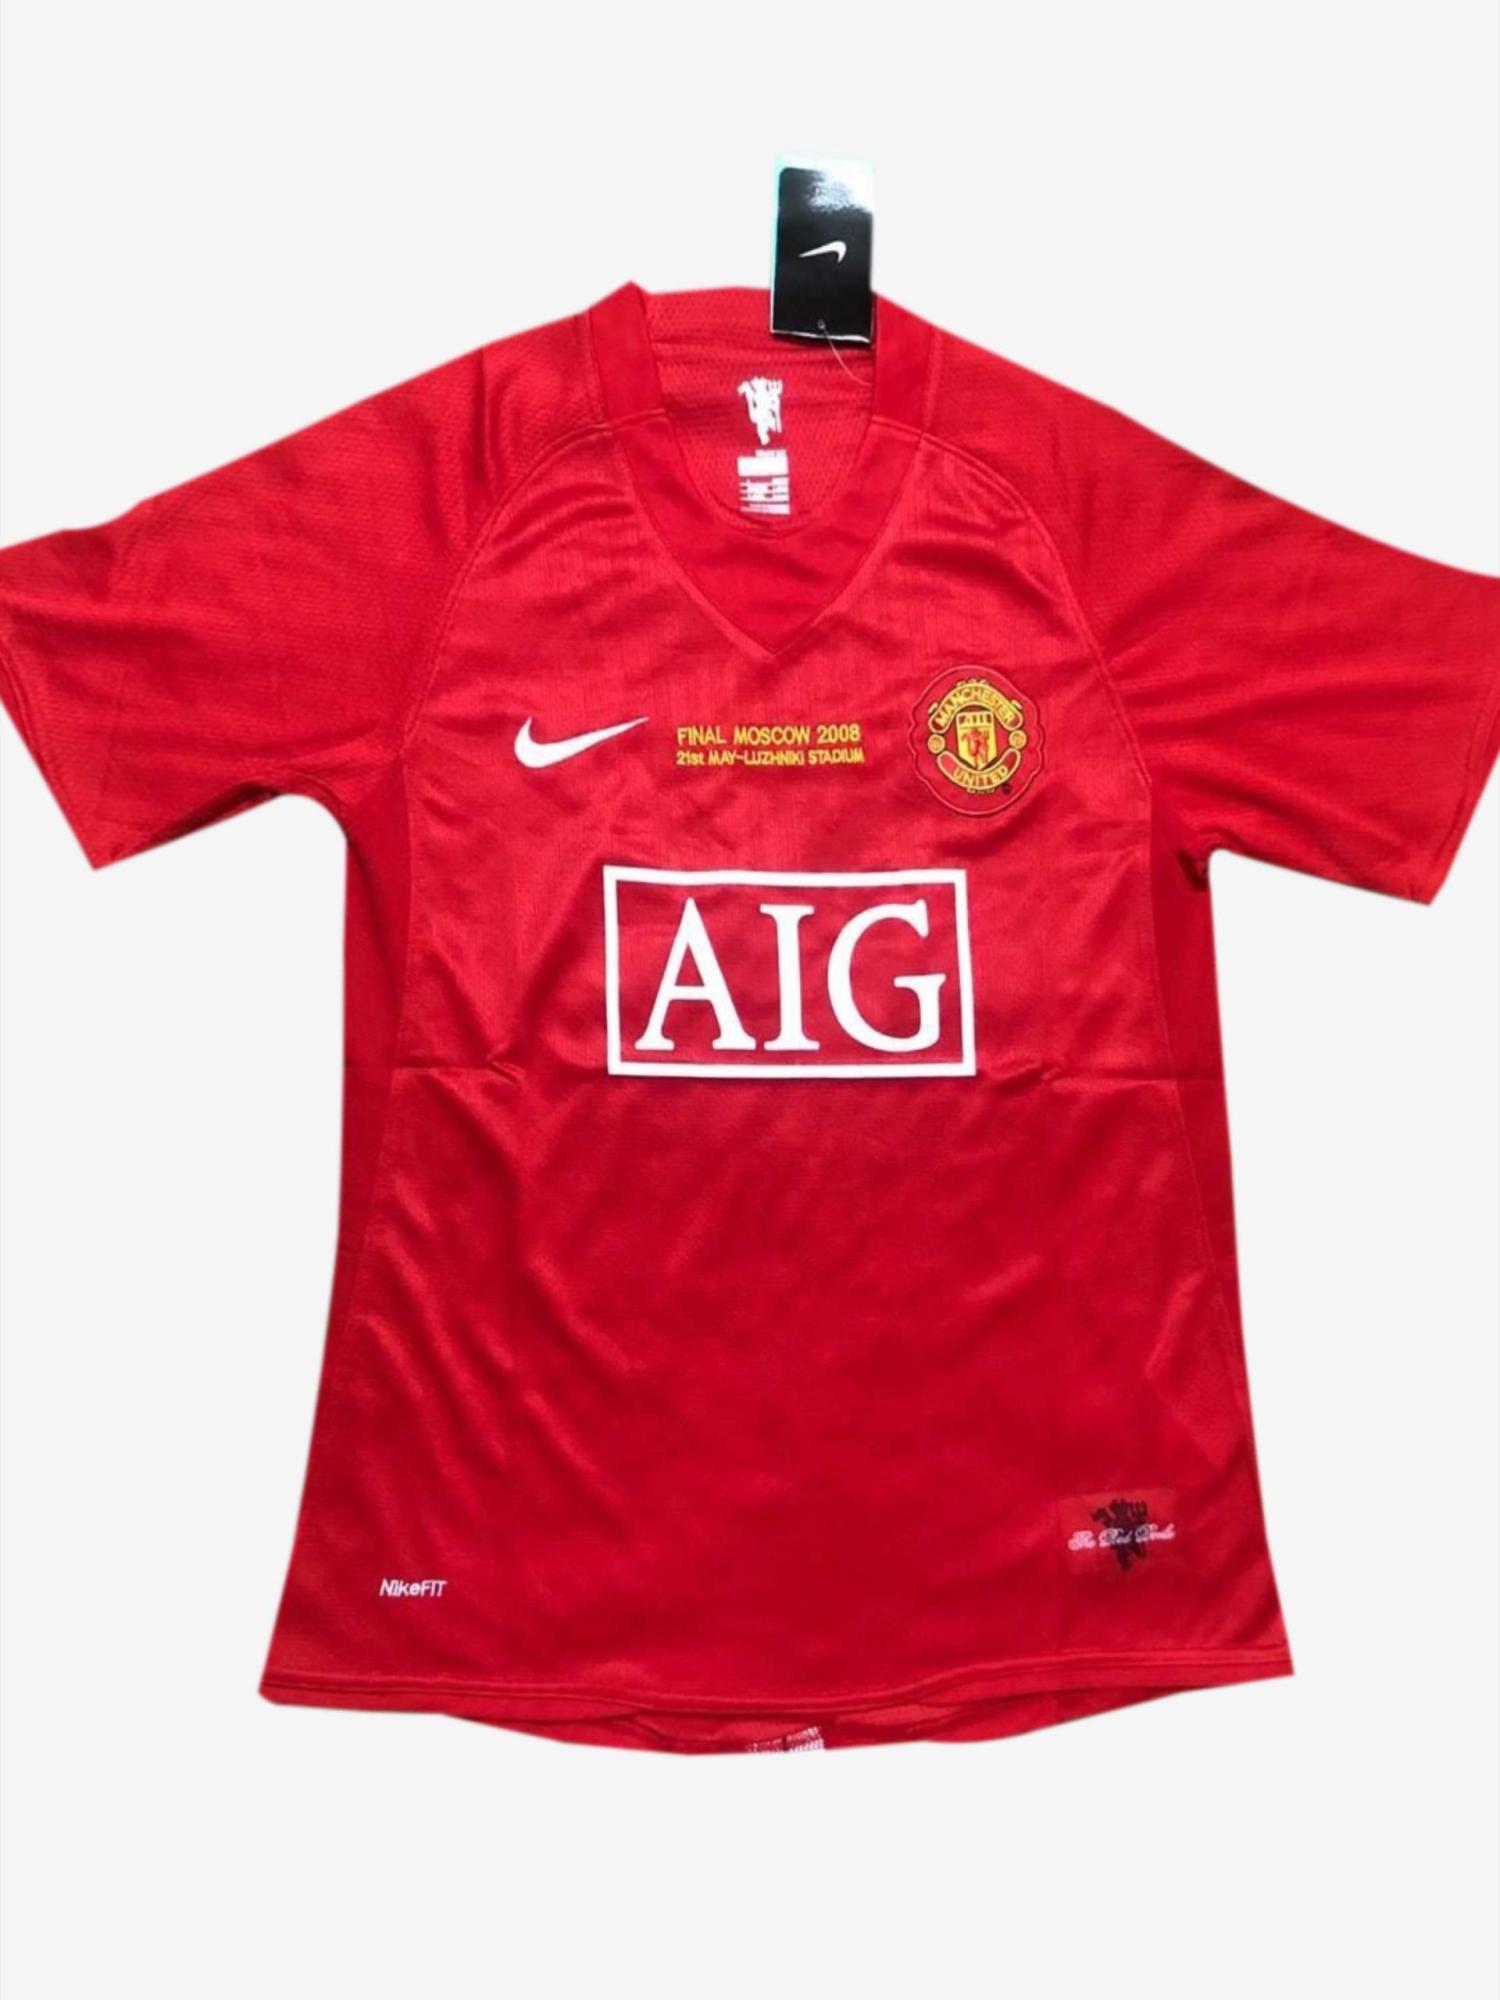 manchester united 2008 jersey